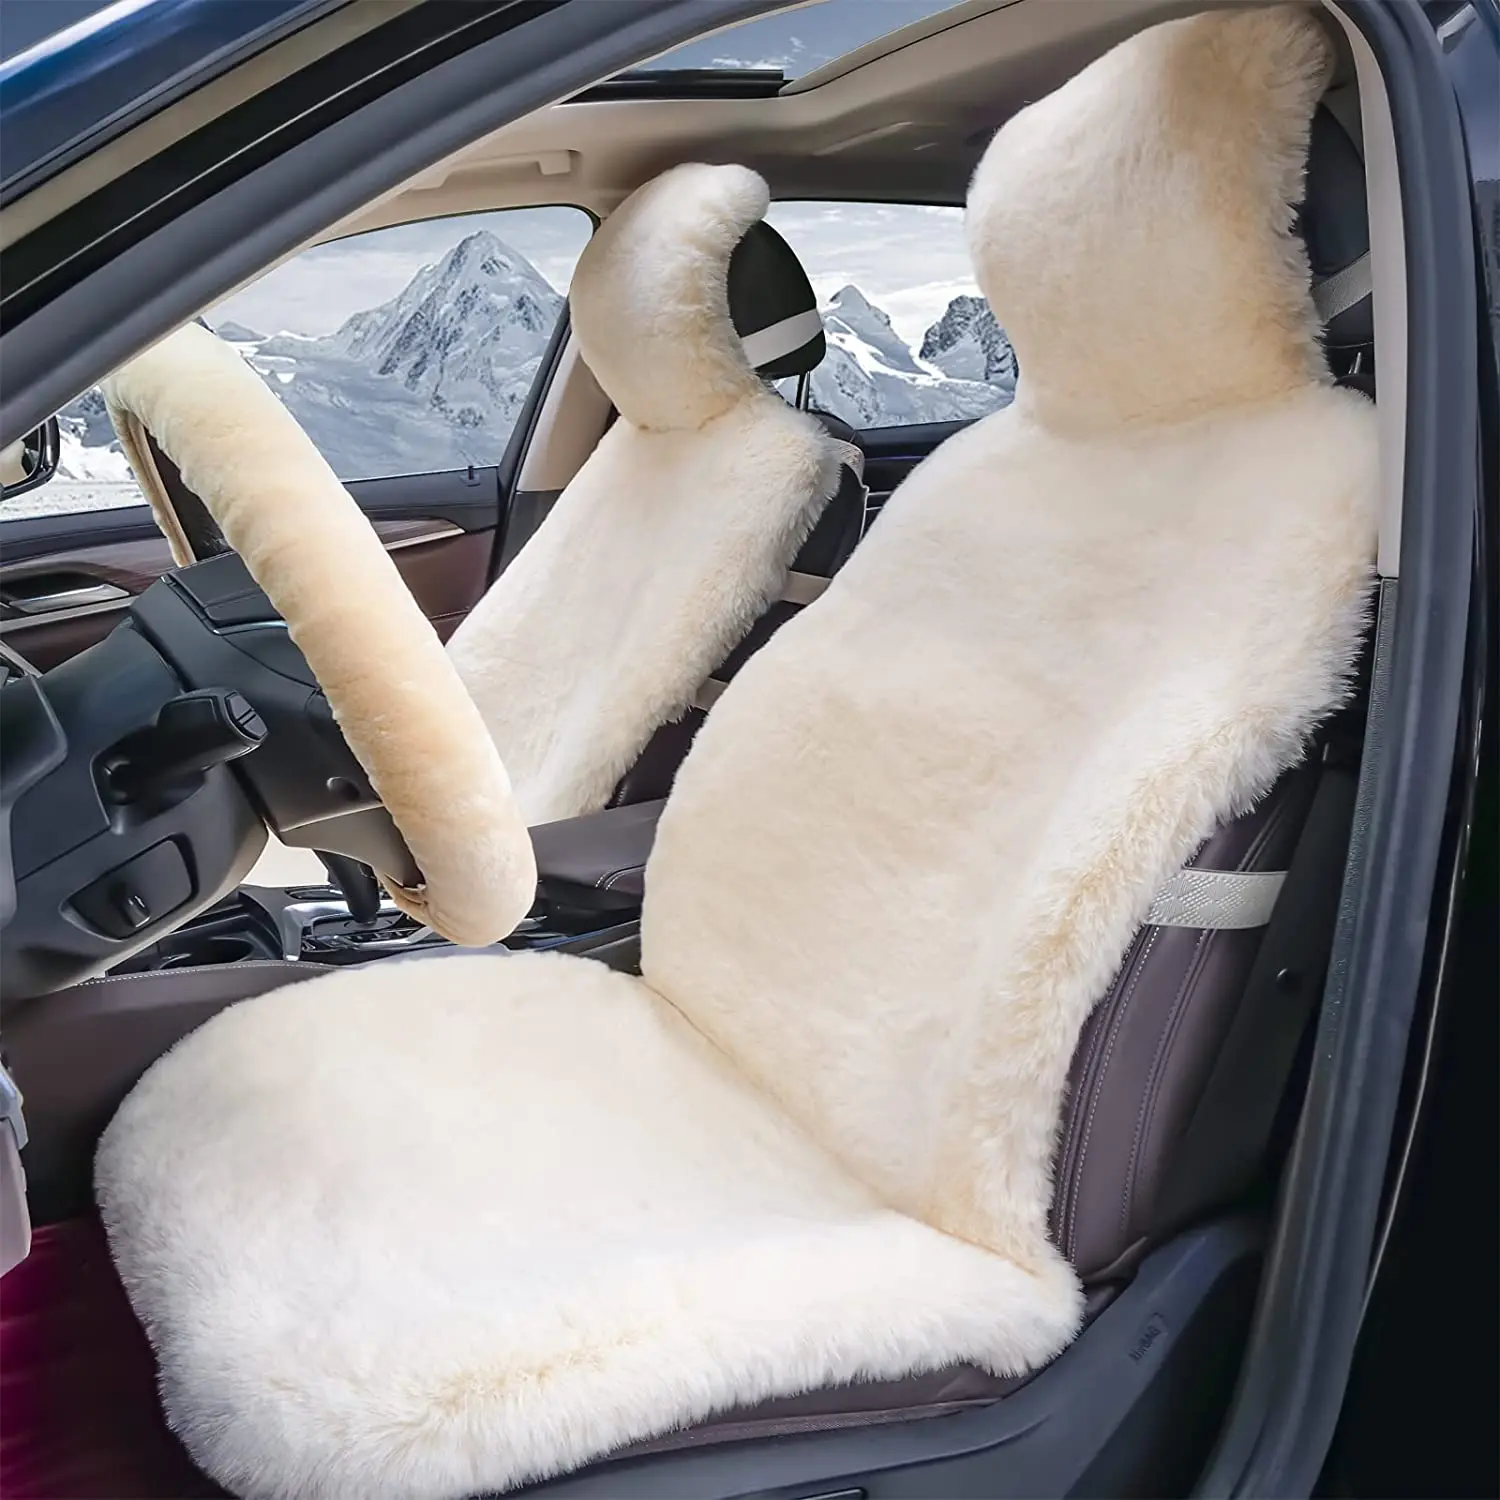 

Sheepskin Seat Covers Full Set Wool Car Seat Cover Winter Warm Plush Car With Fuzzy Steering Wheel Cover 2 Front Fluffy Cushions